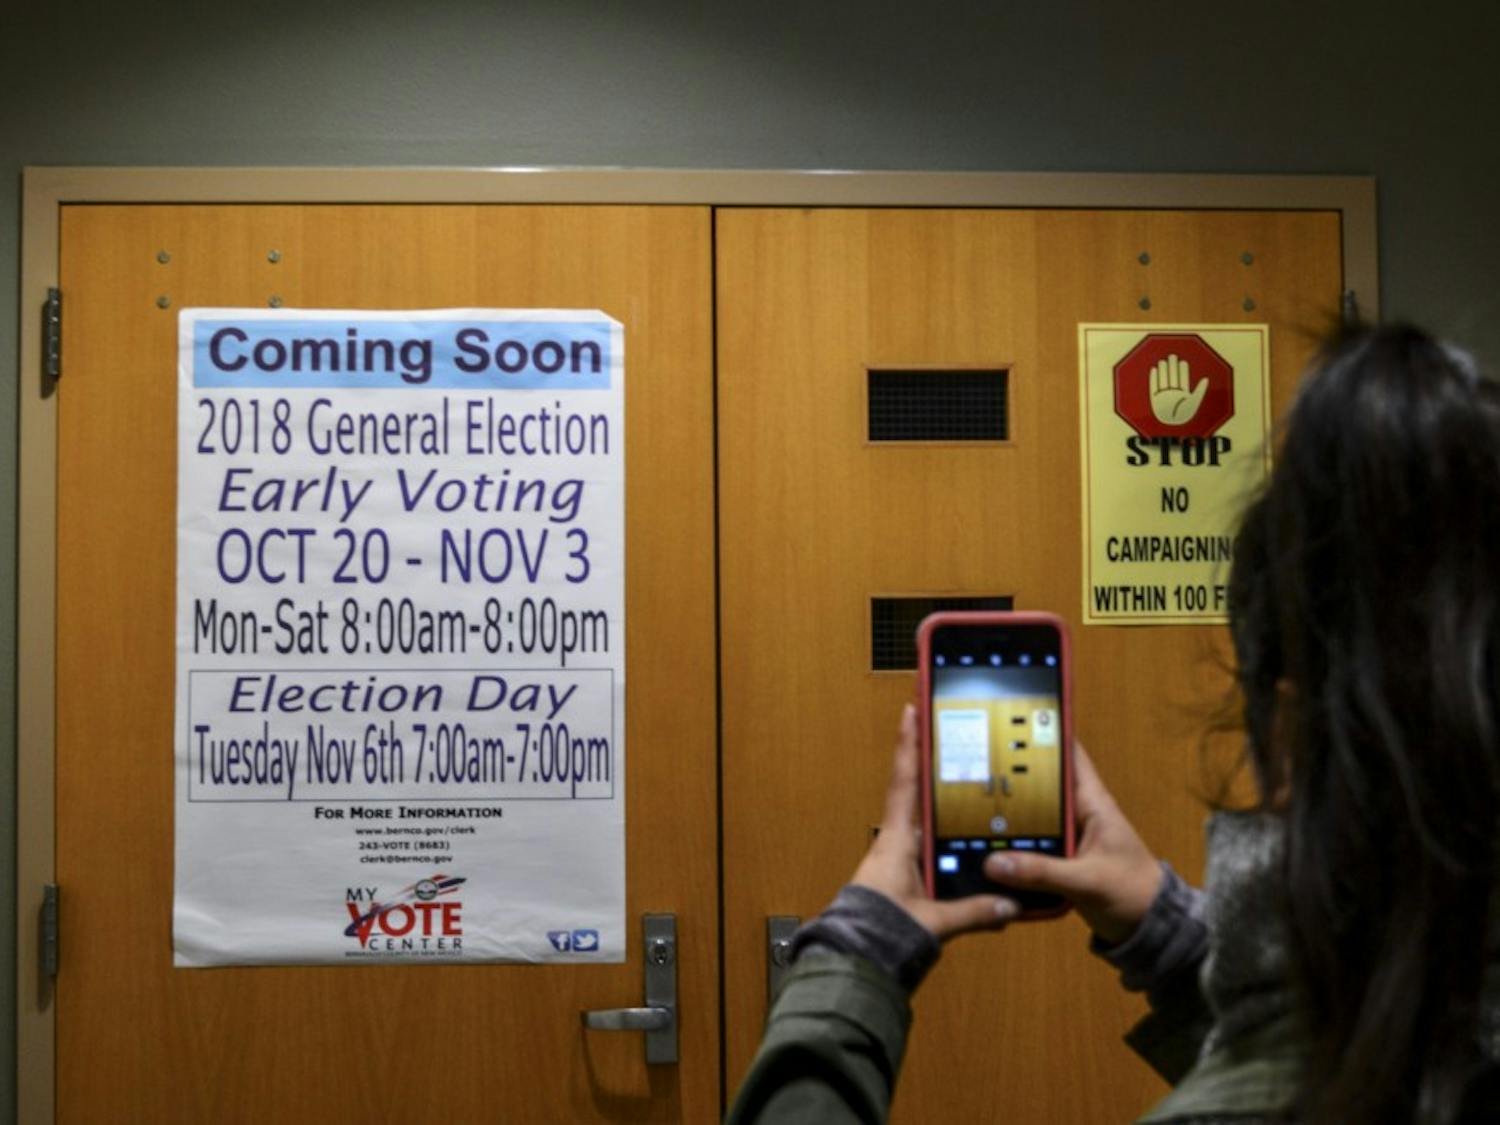 A student takes pictures of a sign regarding UNM’s early voting center.